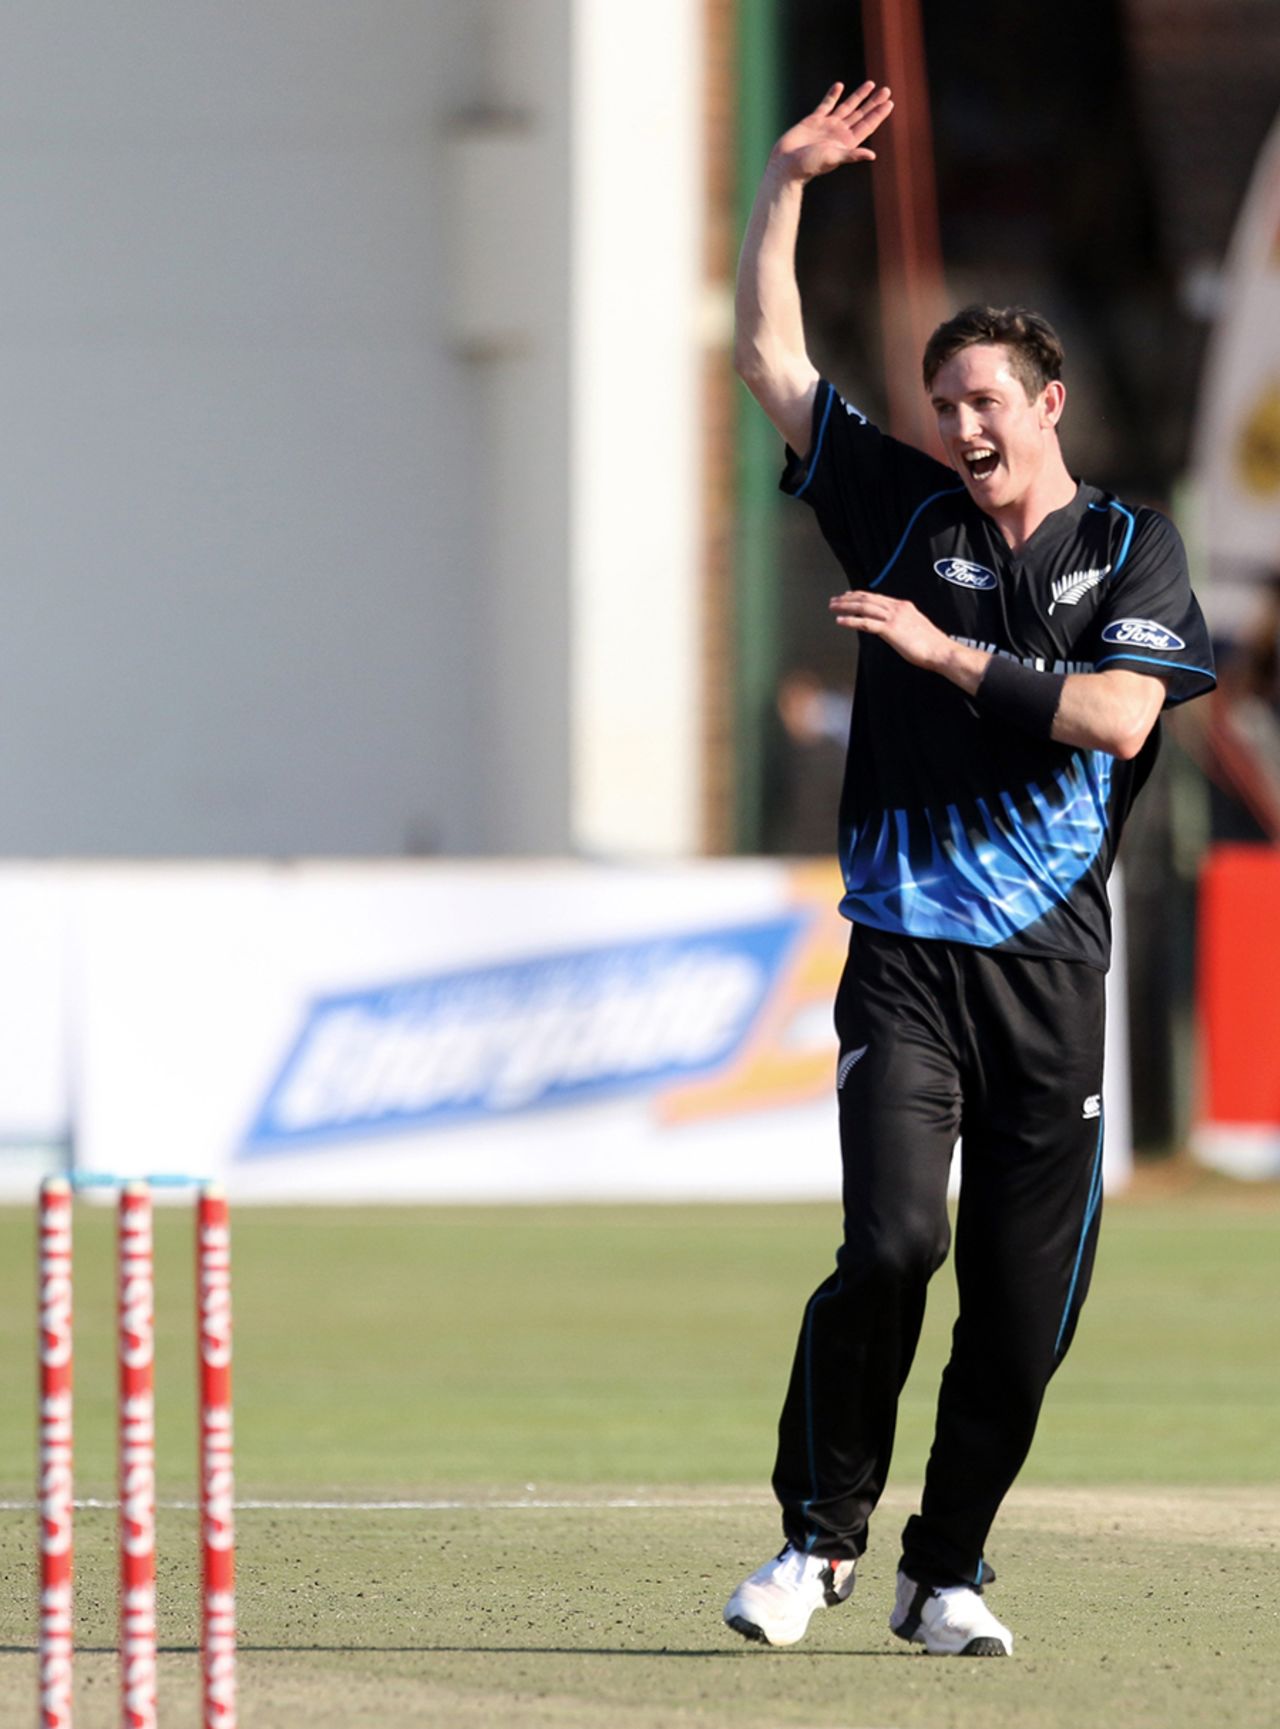 Adam Milne was New Zealand's best bowler with returns of 2 for 10 in his four overs, Zimbabwe v New Zealand, only T20I, Harare, August 9, 2015